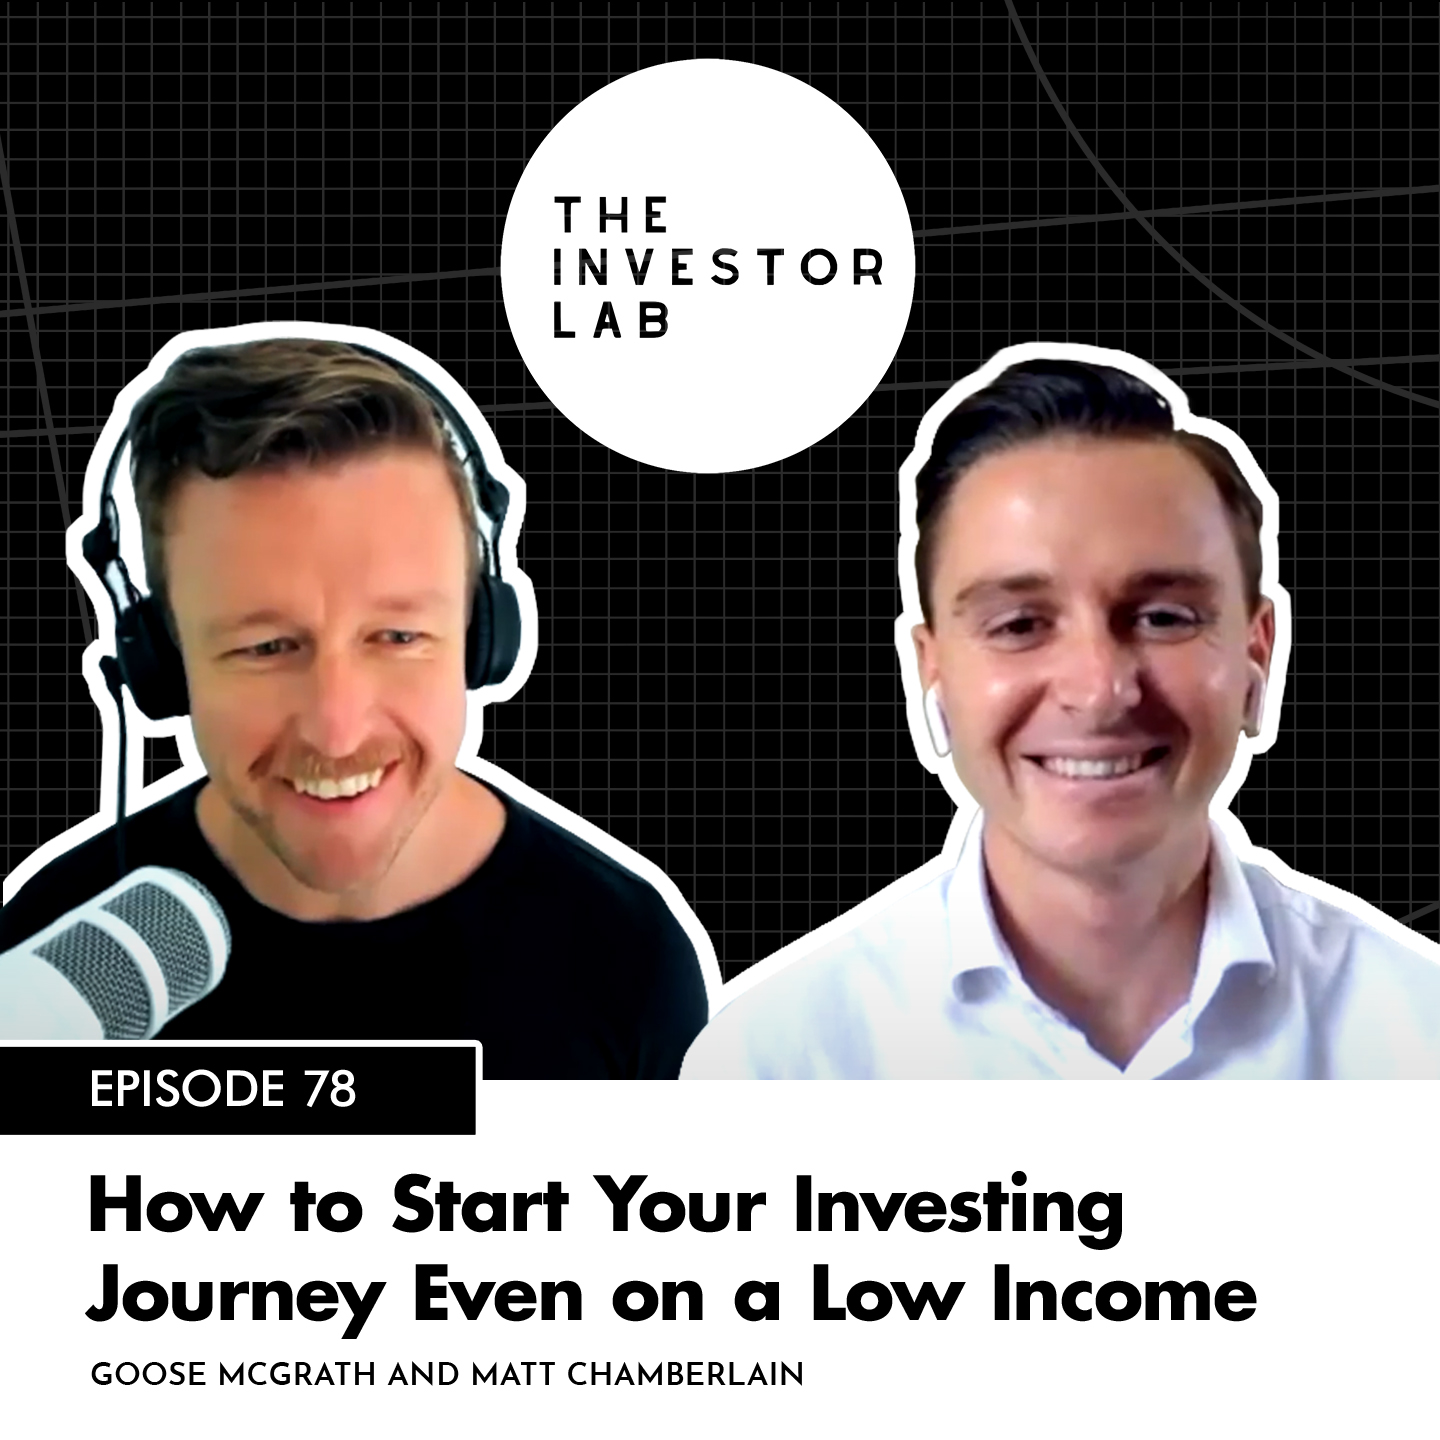 How to Start Your Investing Journey Even on a Low Income with Matt Chamberlain